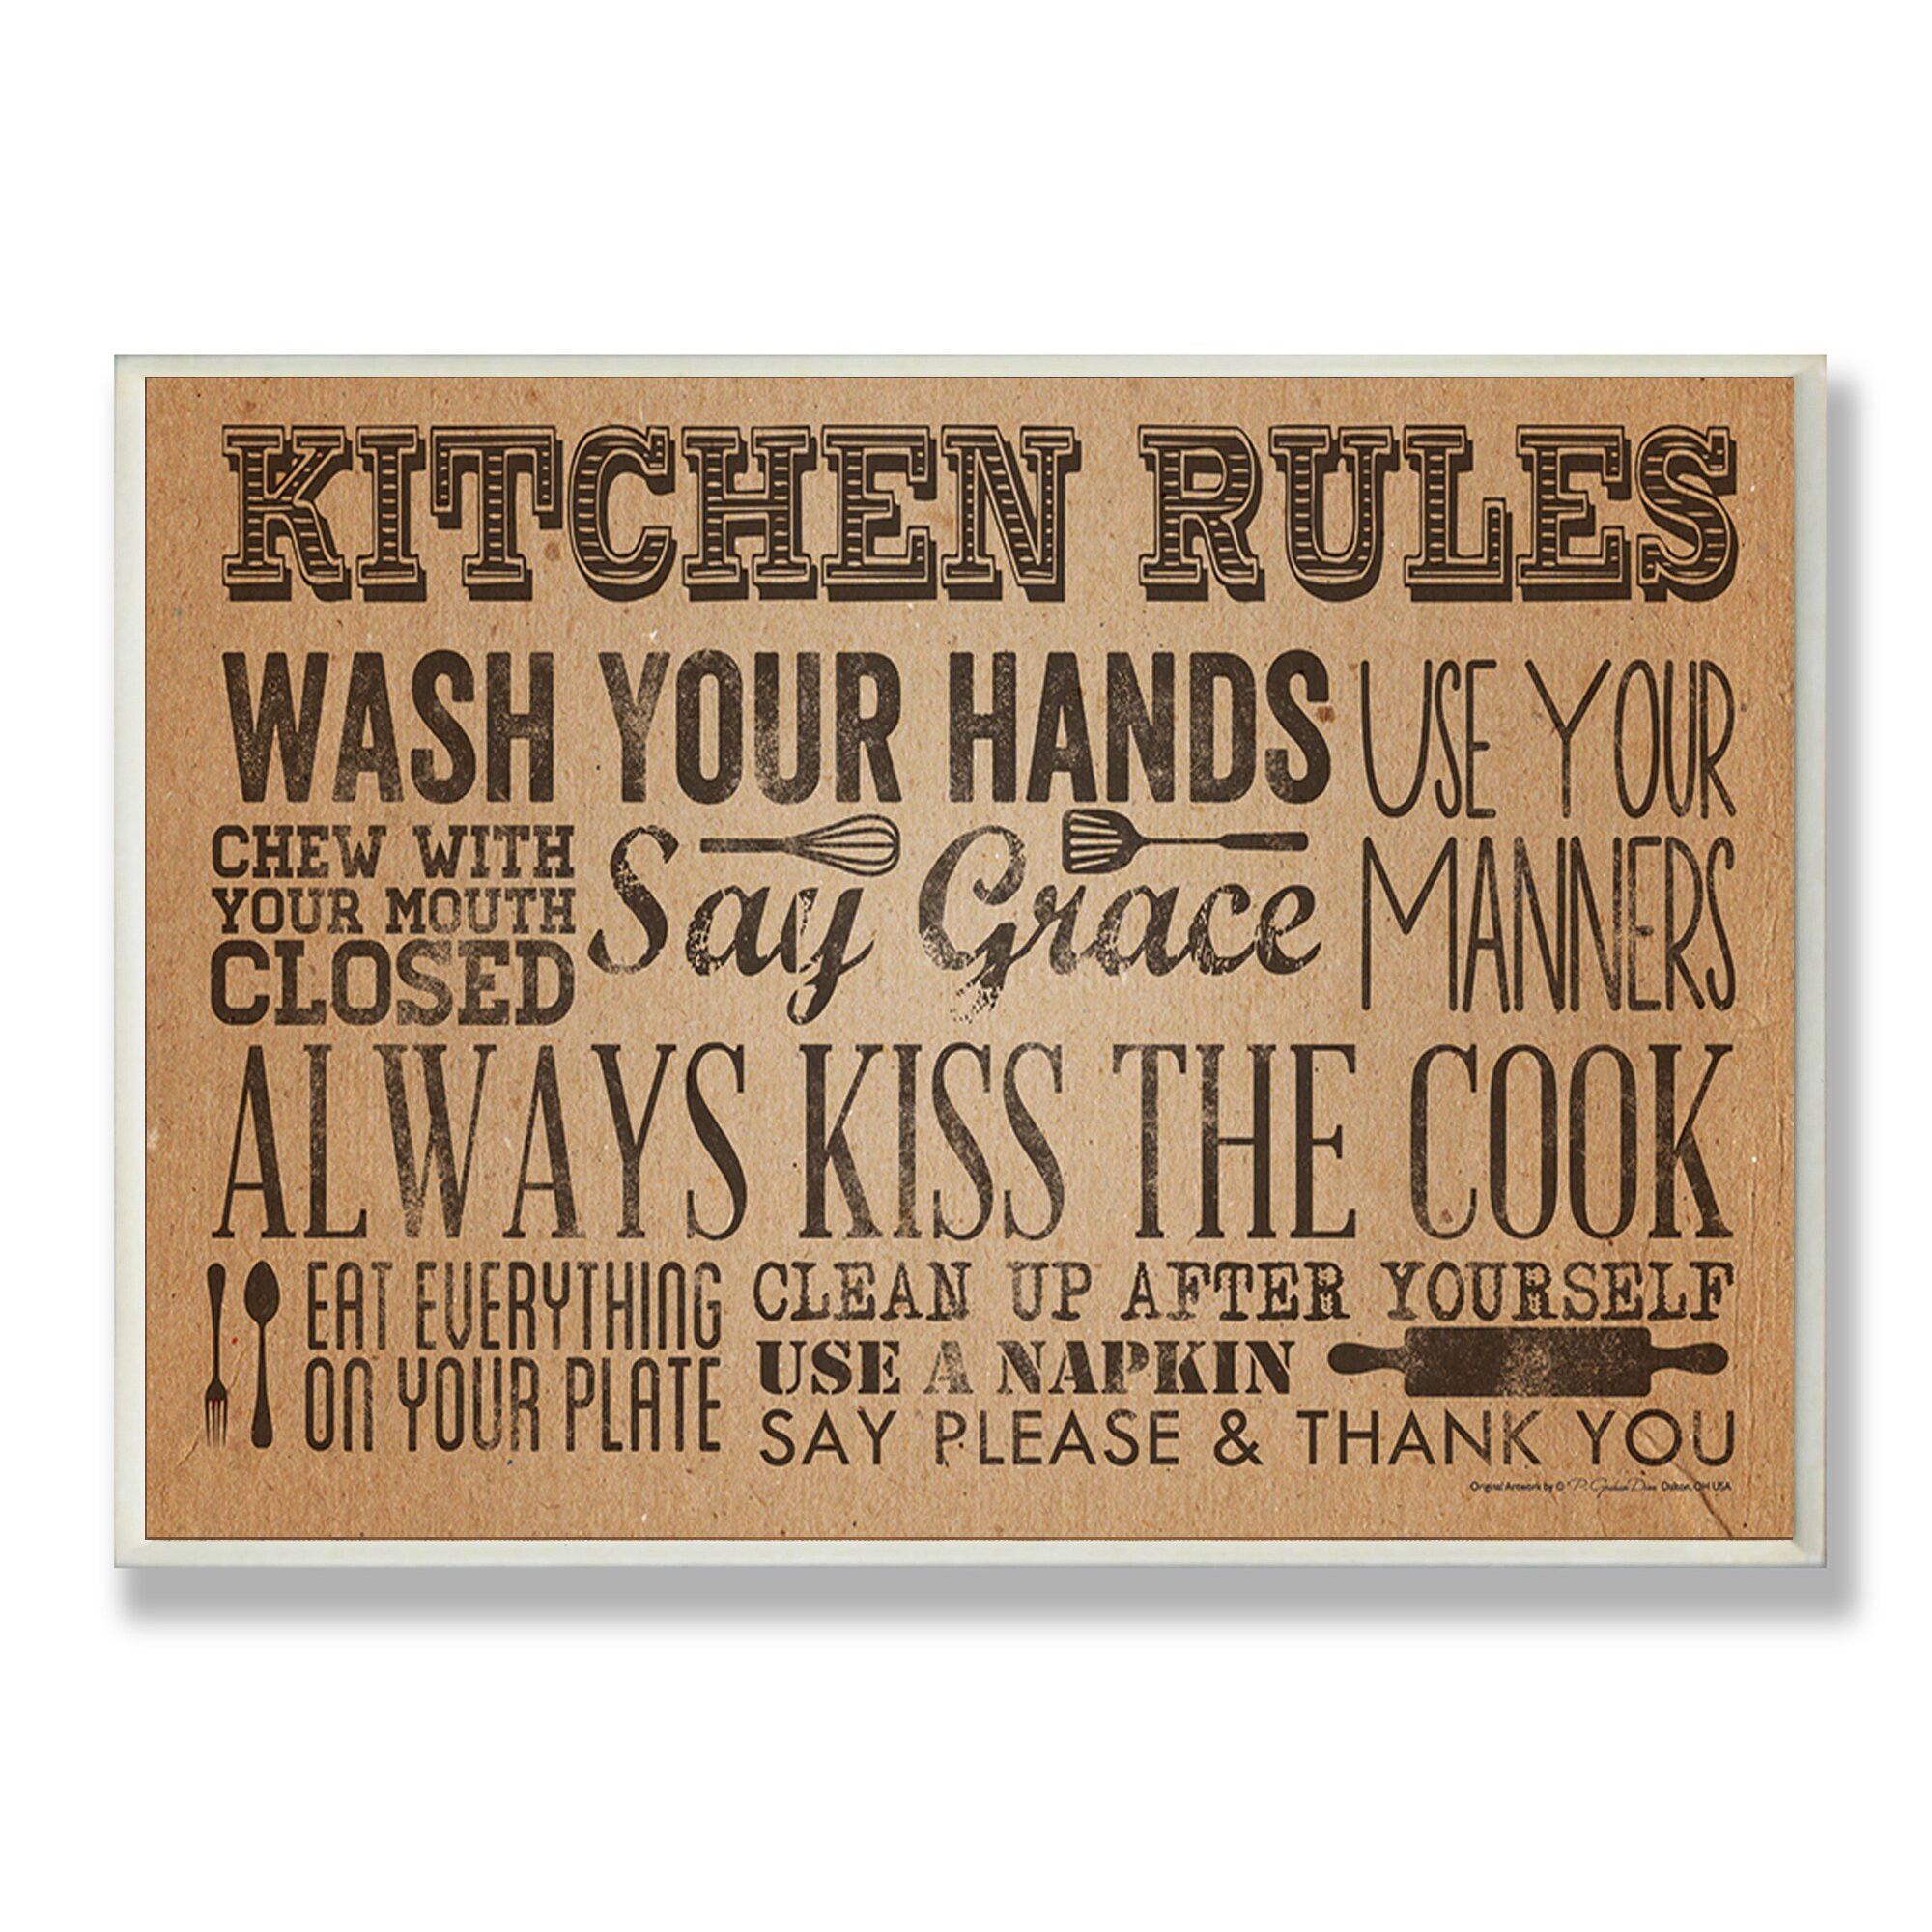 Kitchen Rules Wall Decor
 Stupell Industries Paper Towel Look Kitchen Rules Textual